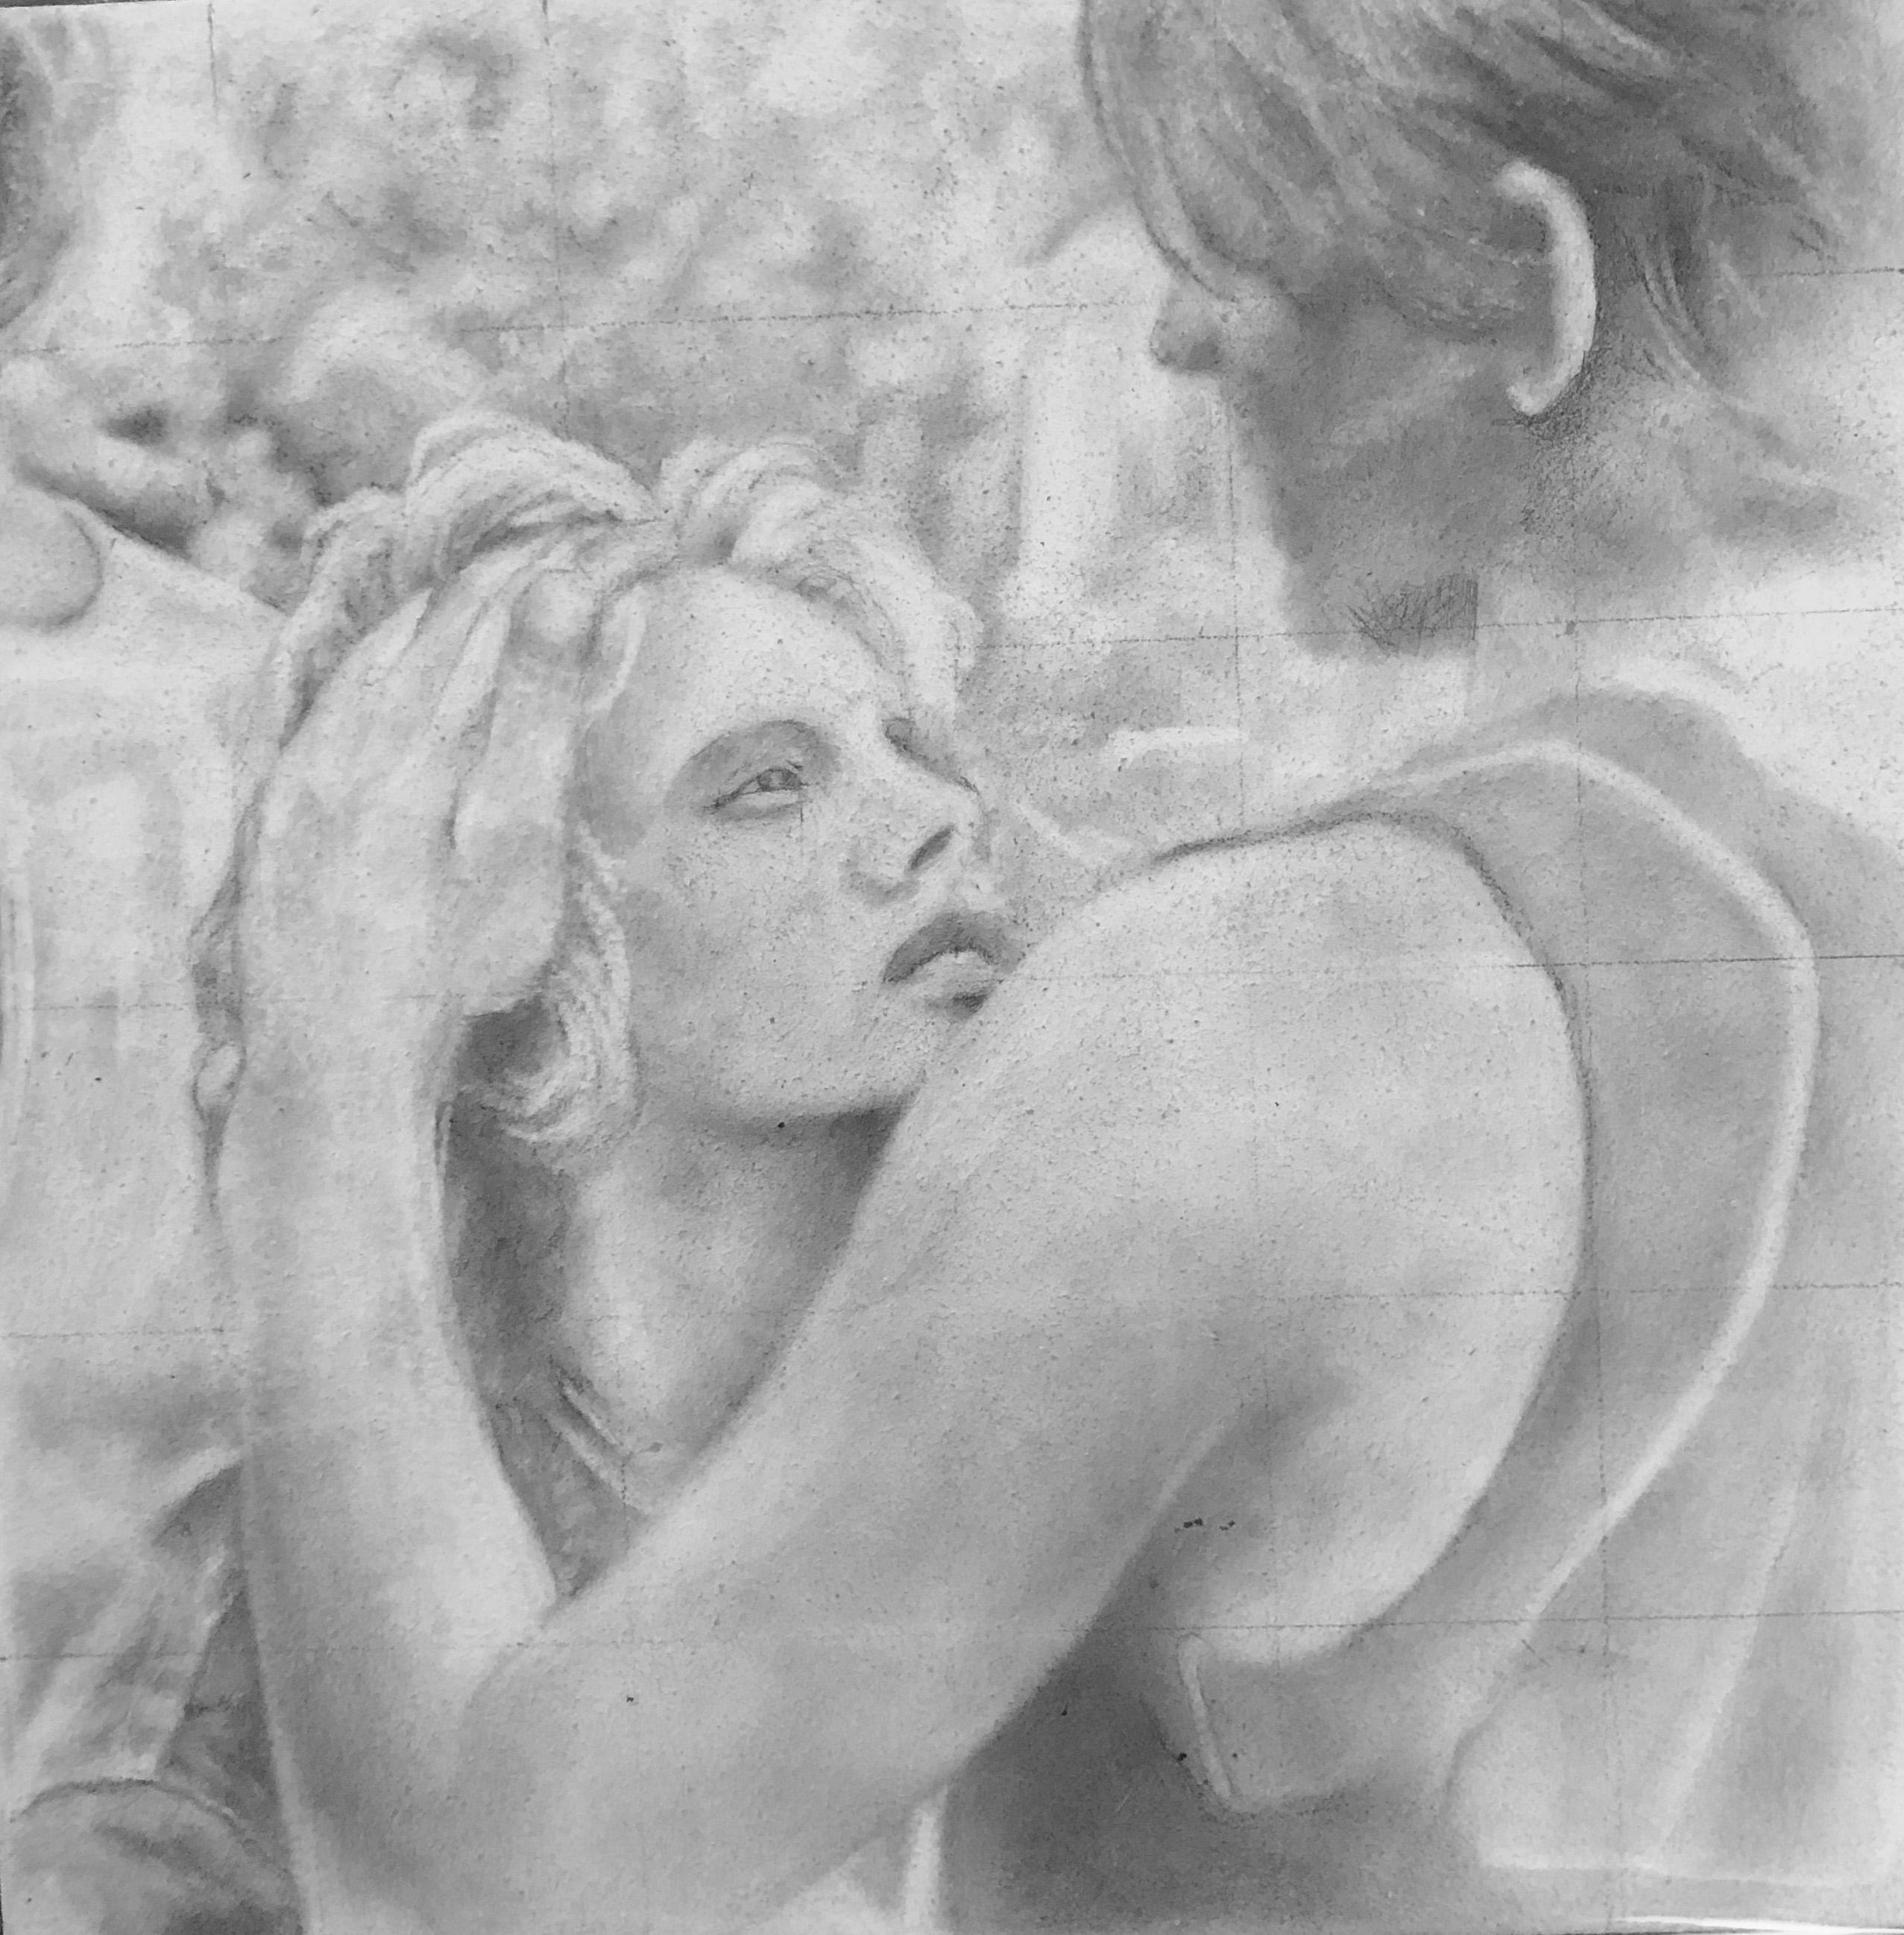 Untitled #6 - Original Graphite Drawing on Panel, Two Figures in Intimate Moment